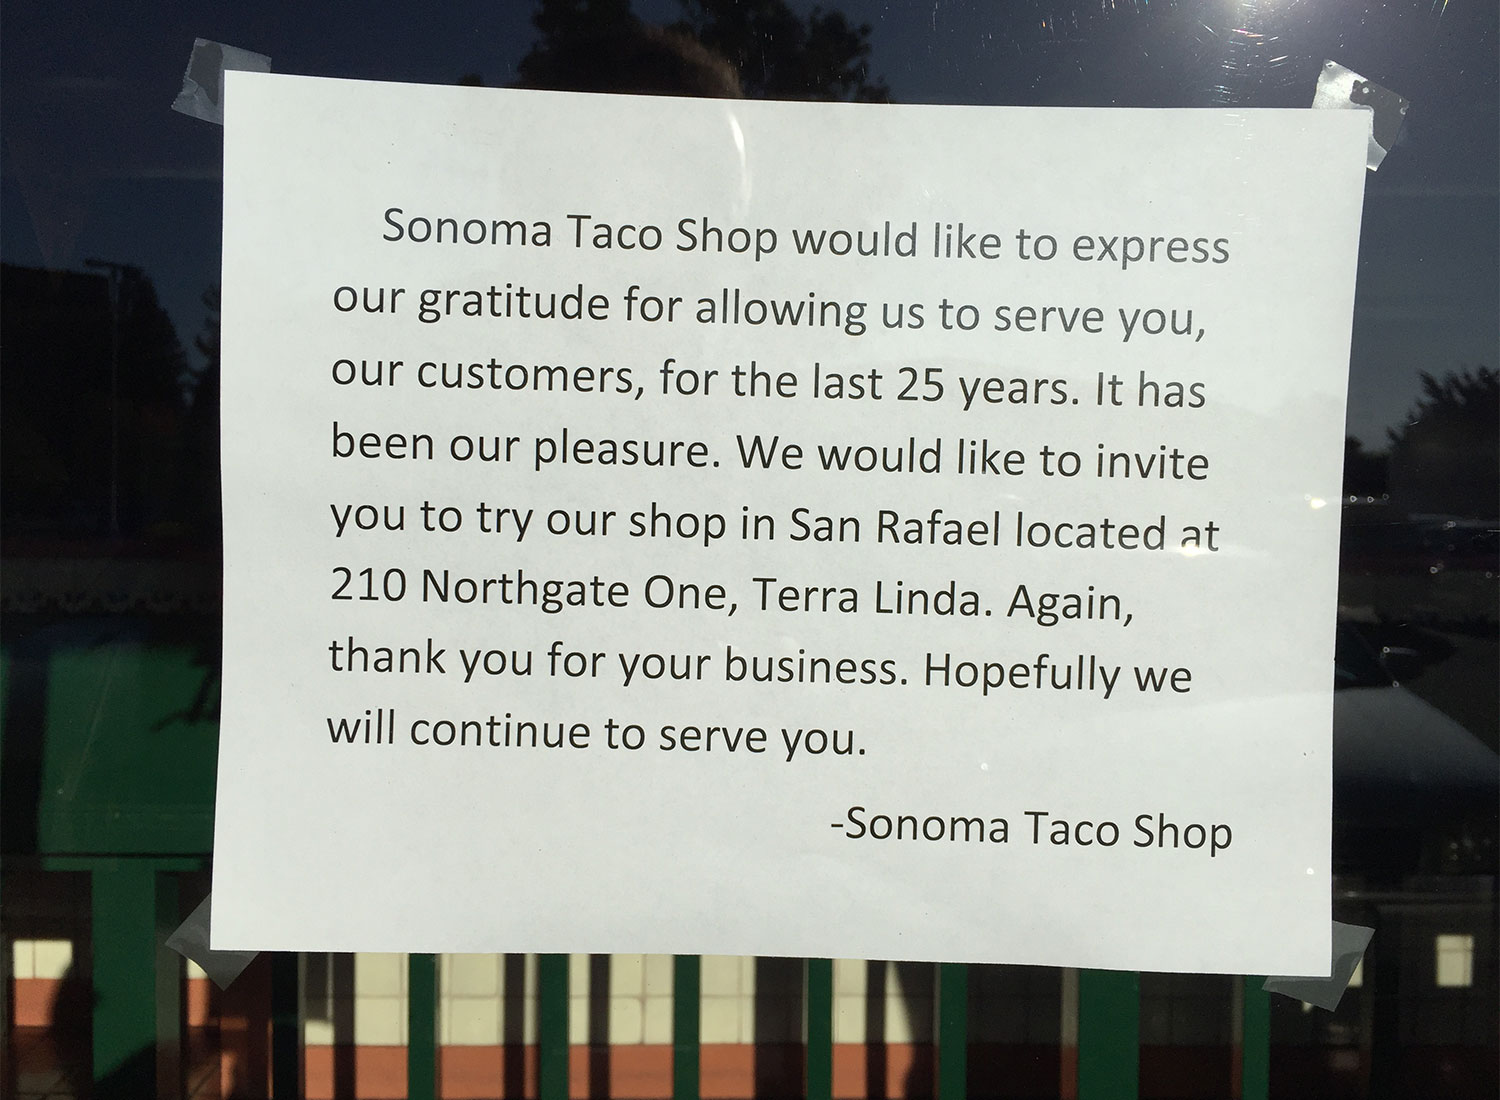 Sonoma Taco Shop has closed after 25 years